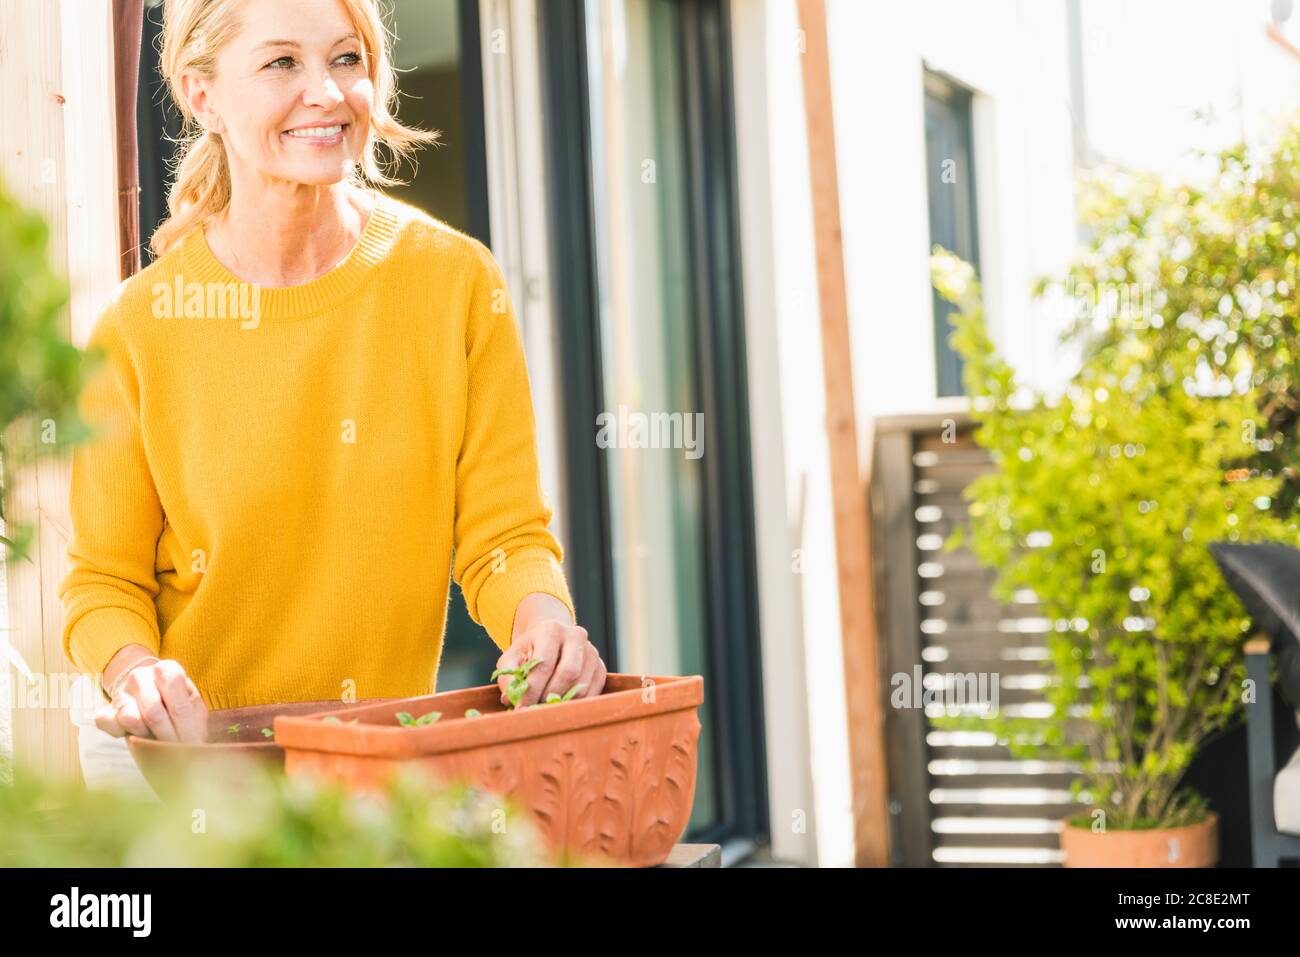 Portrait of smiling mature woman gardening on terrace Stock Photo